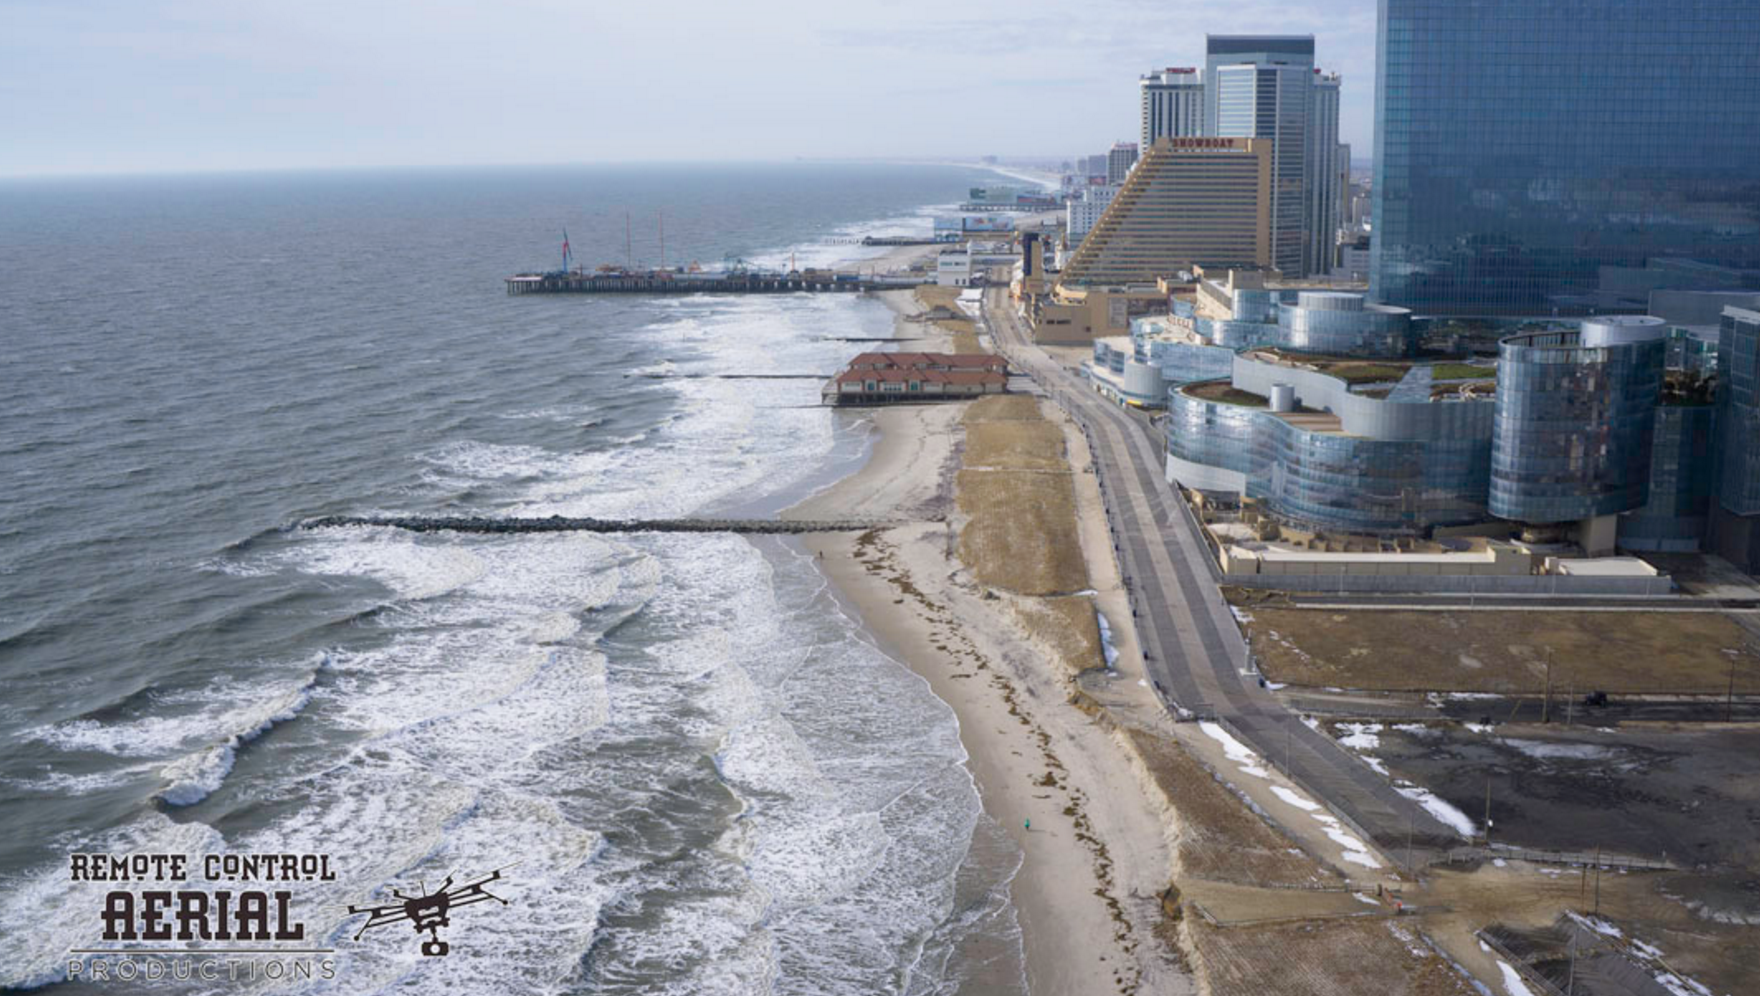  Northern Atlantic City following the latest nor'easter on Jan. 26, 2016. The state documented major damage to the city's beaches. (Image: Remote Control Aerial Productions) 